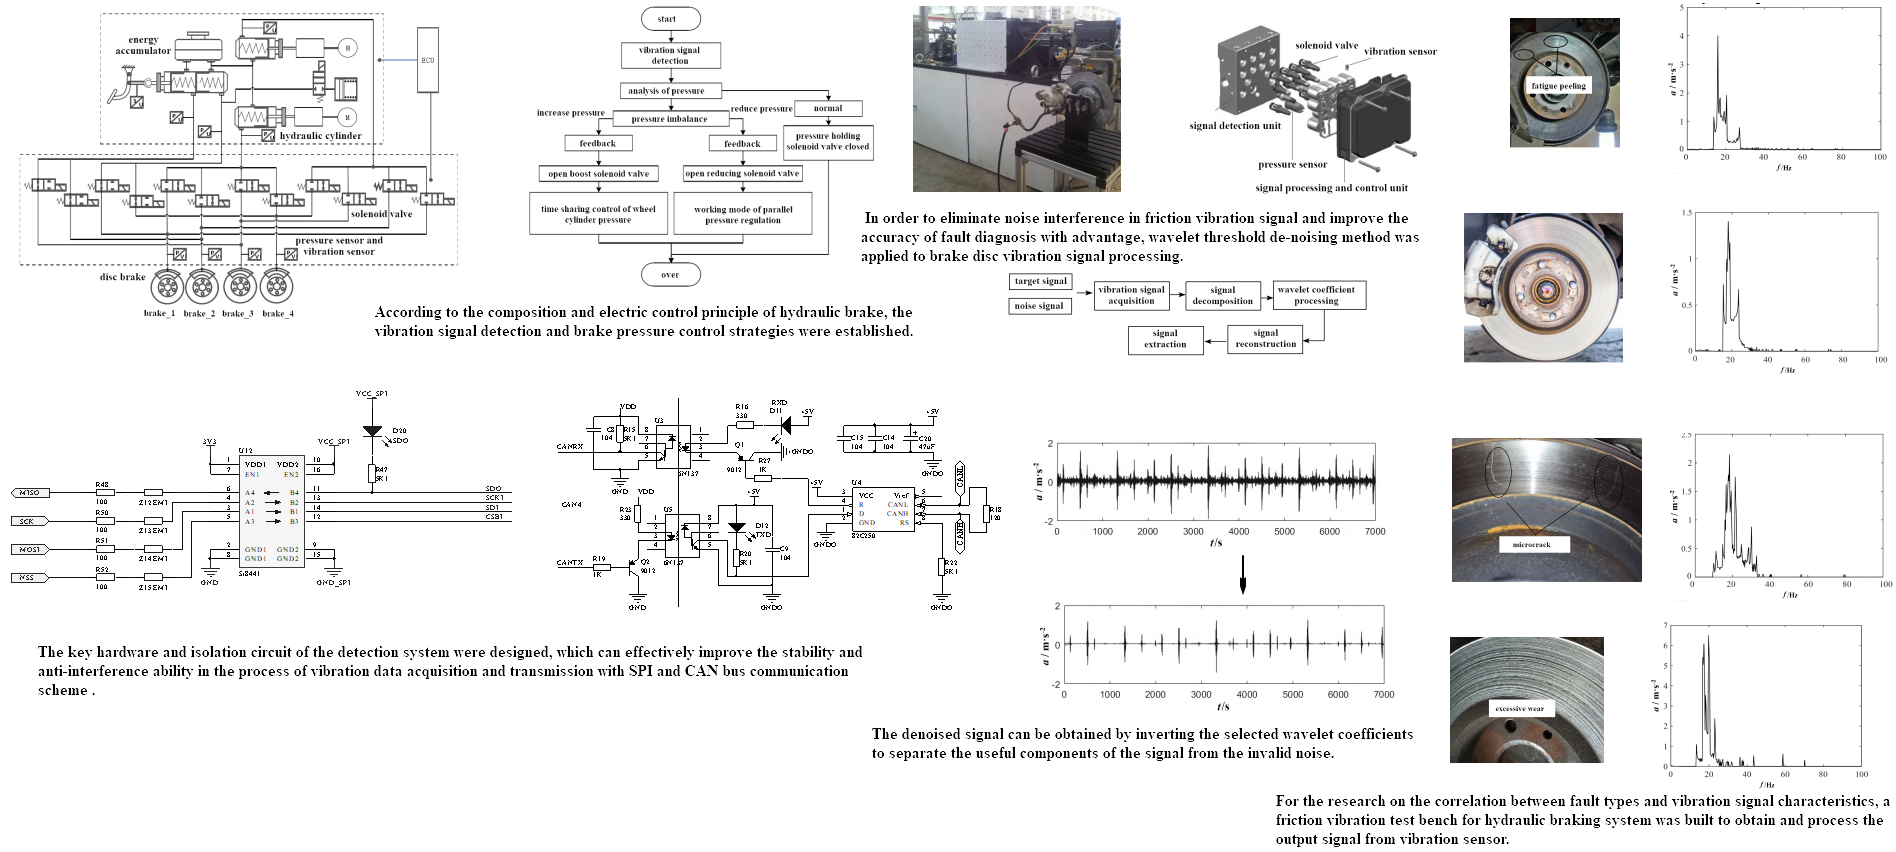 Fault diagnosis and analysis of hydraulic brake based on friction vibration signal